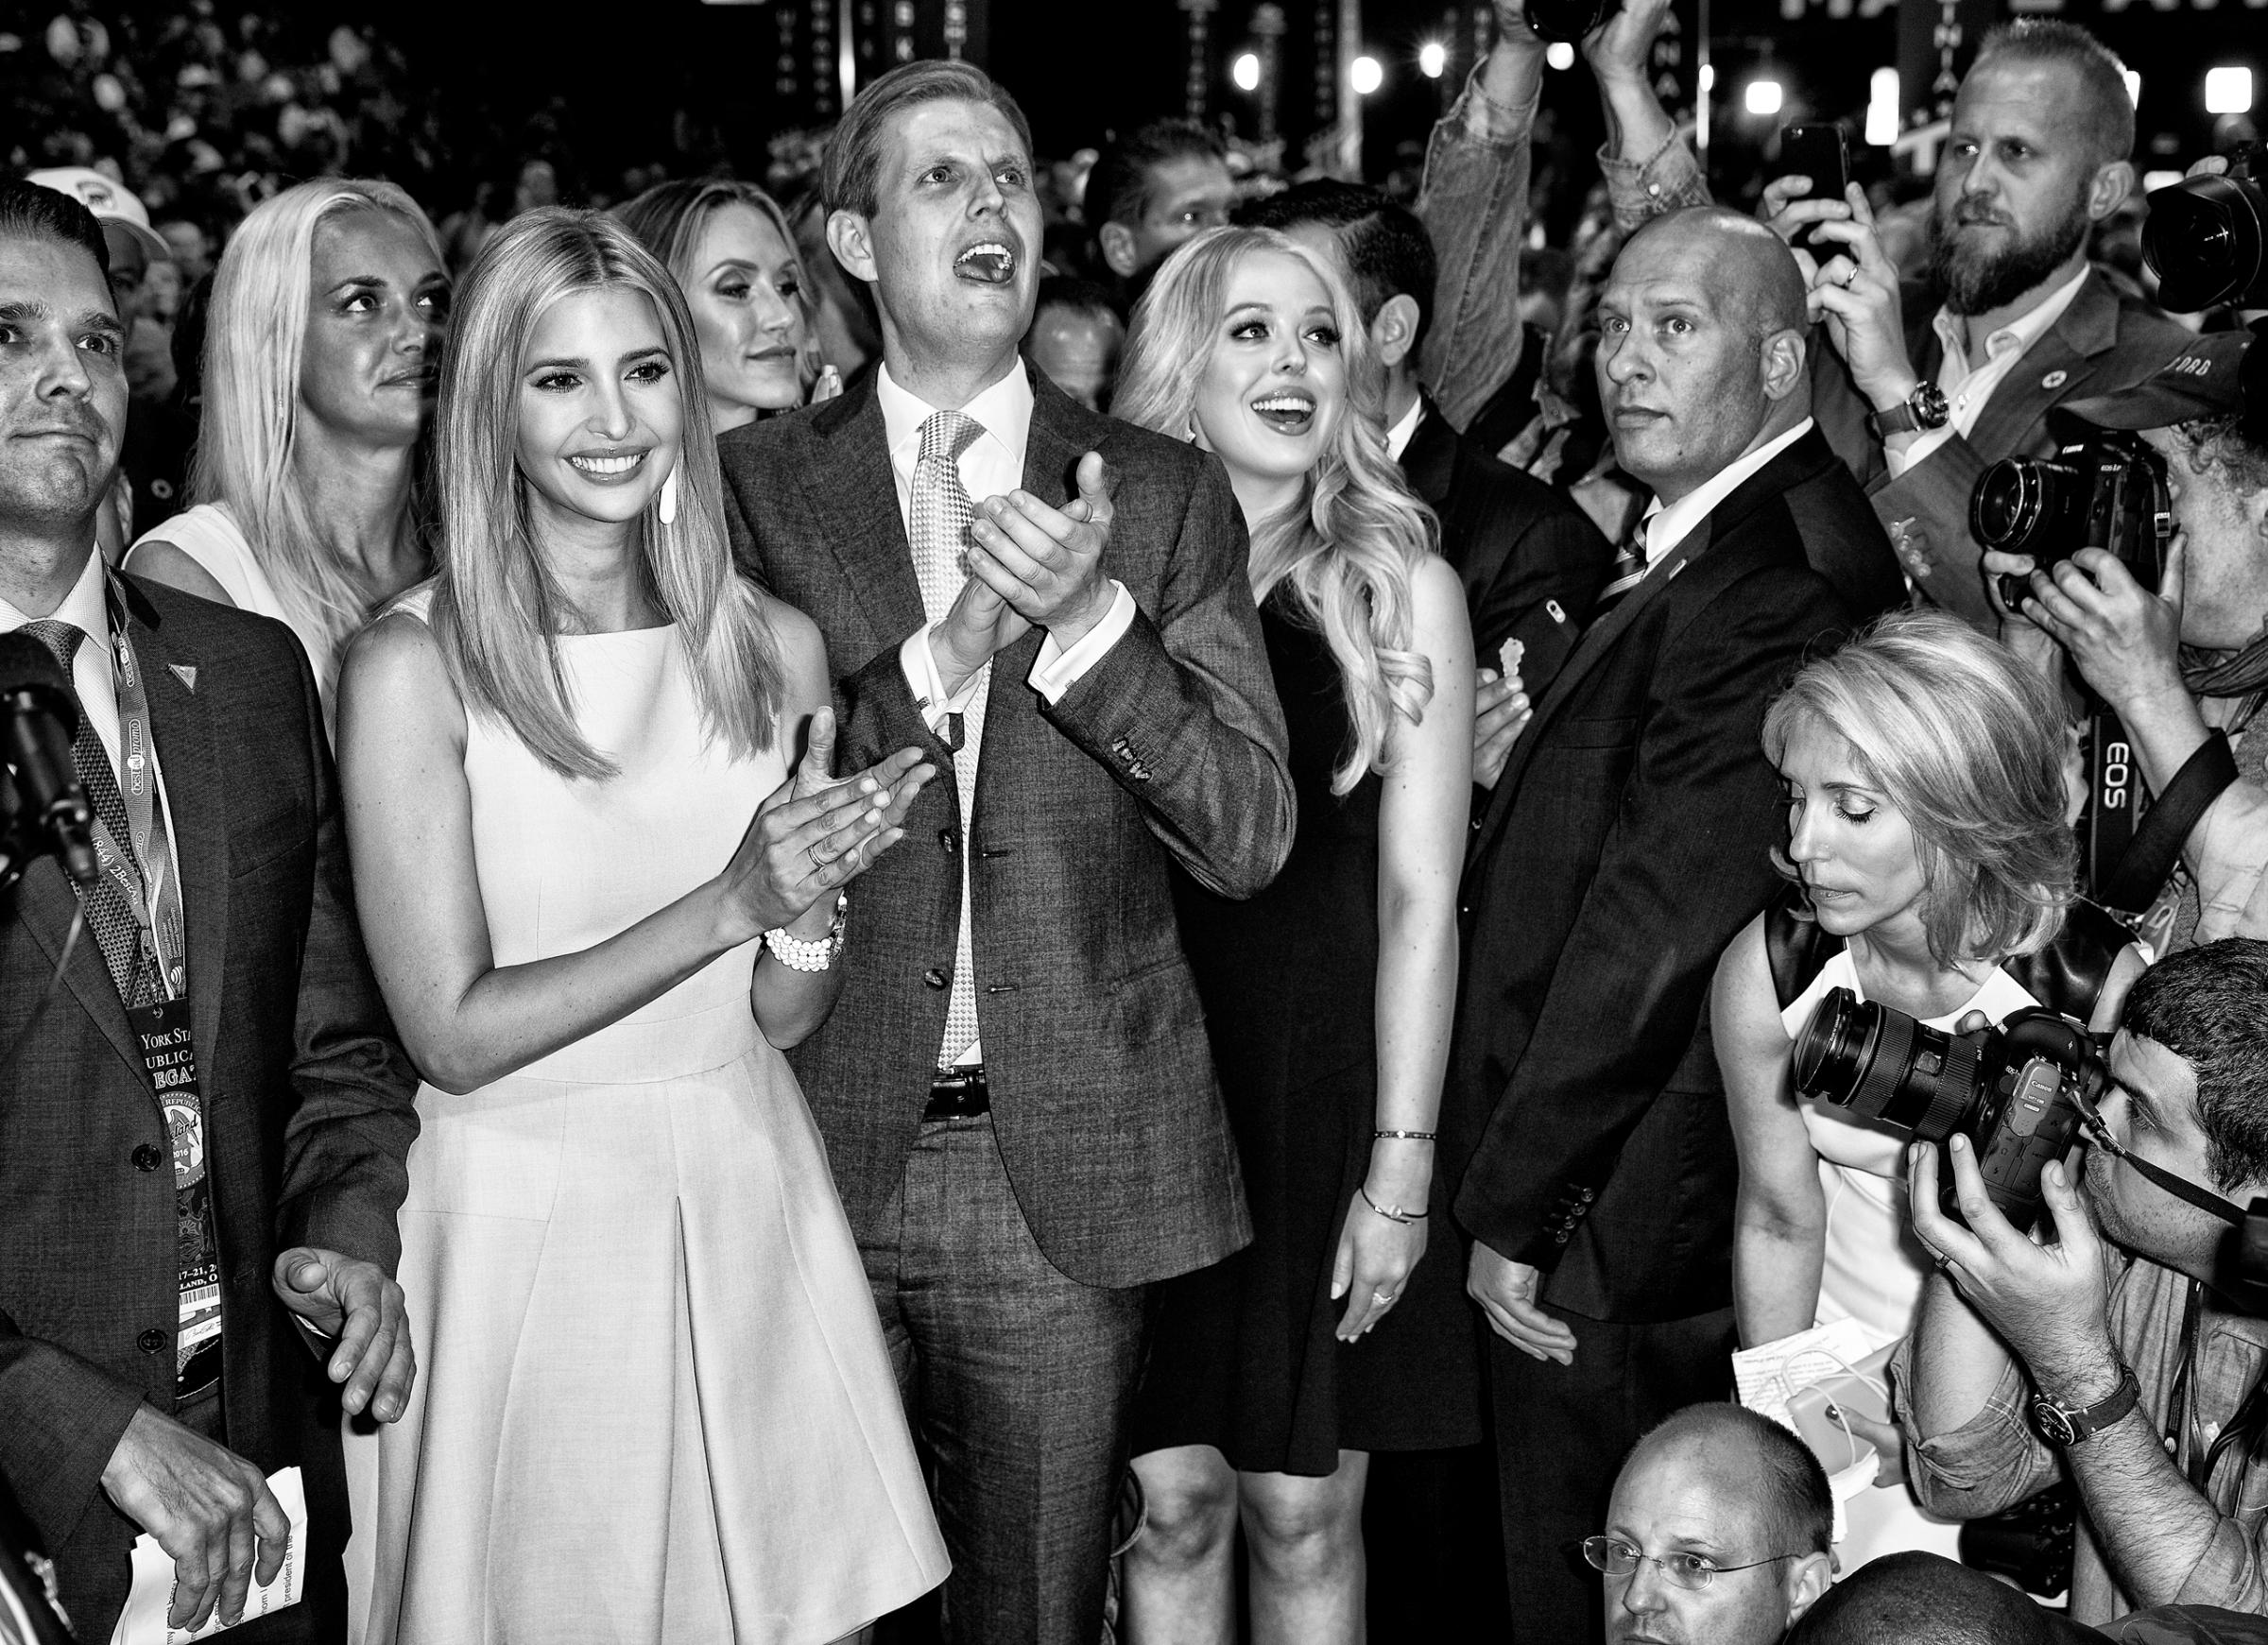 Donald Trump's family cheers for him during the Republican National Convention in Cleveland, Ohio, on July 19, 2016.